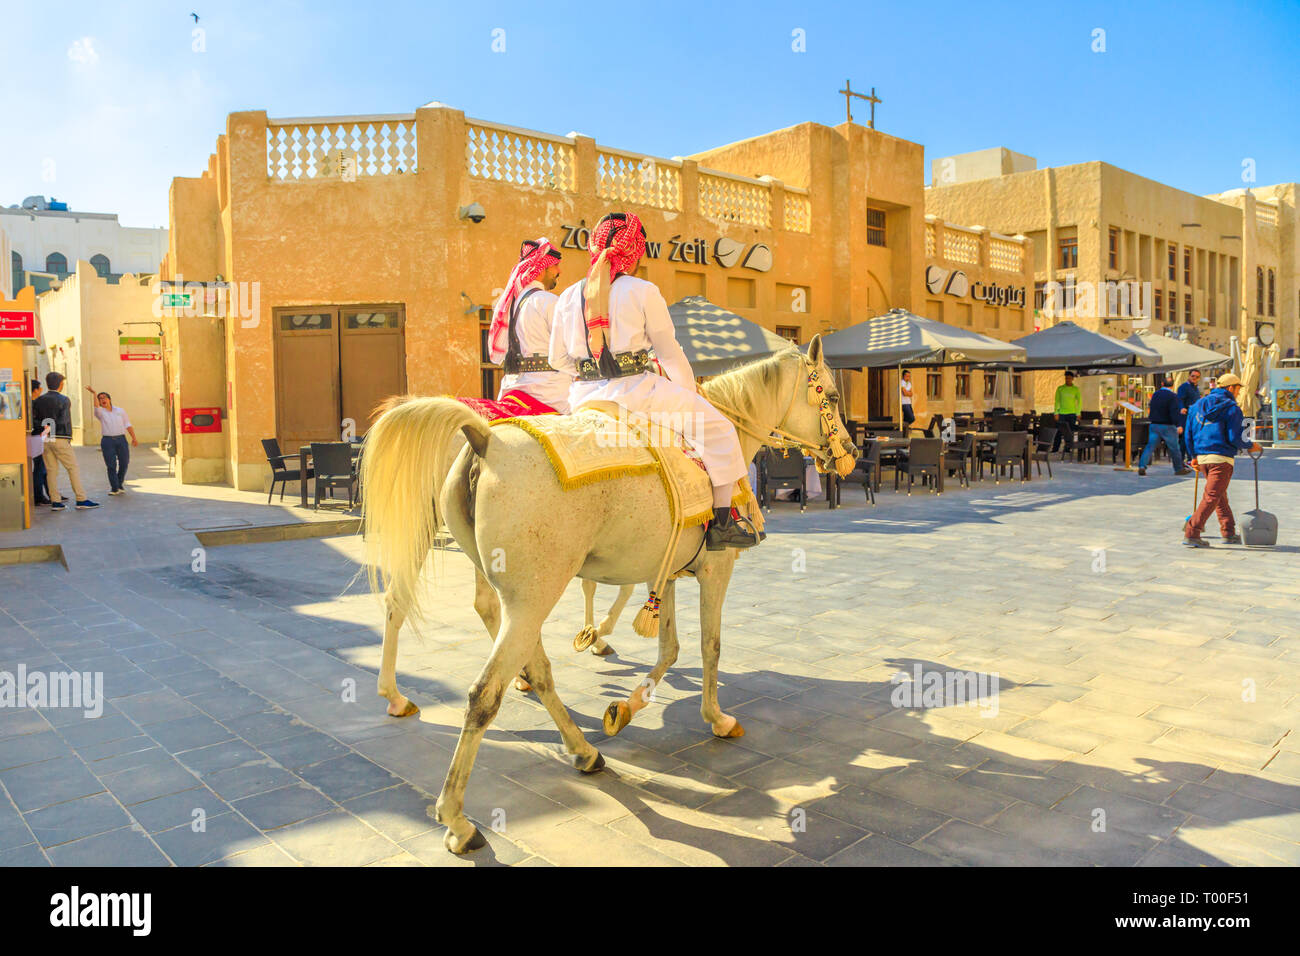 Doha, Qatar - February 20, 2019: Police on horse in traditional clothes at old Souq Waqif riding white Arabian Horses on pedestrian road. Popular Stock Photo